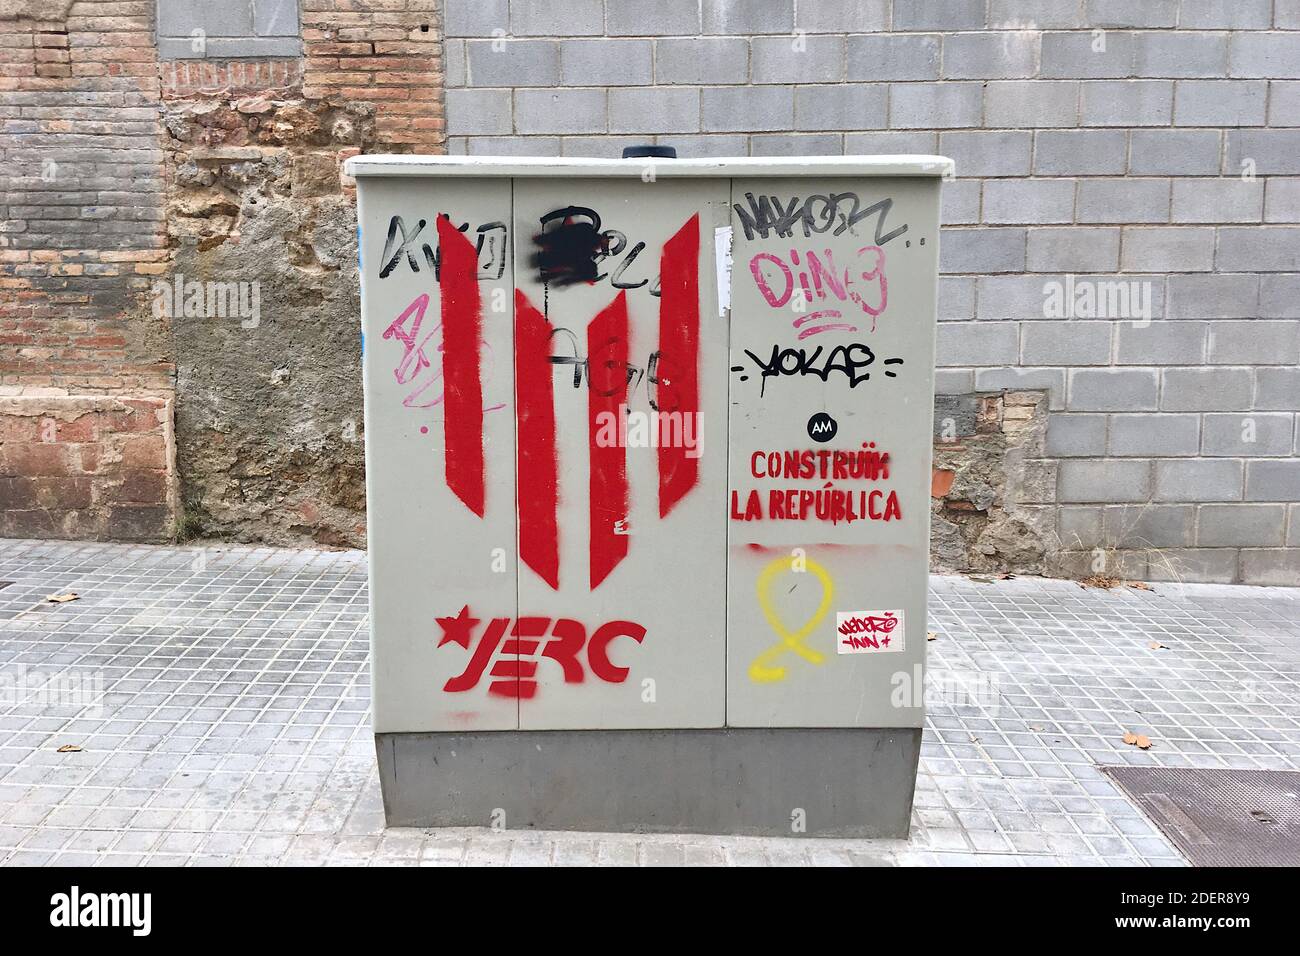 Symbols, tags, graffitis, demonstrations, protestations, propaganda of the Catalan independence movement in the streets of Barcelona.October 23, 2019, Barcelona, Spain. Photo by Nicolas Roses/ABACAPRESS.COM Stock Photo